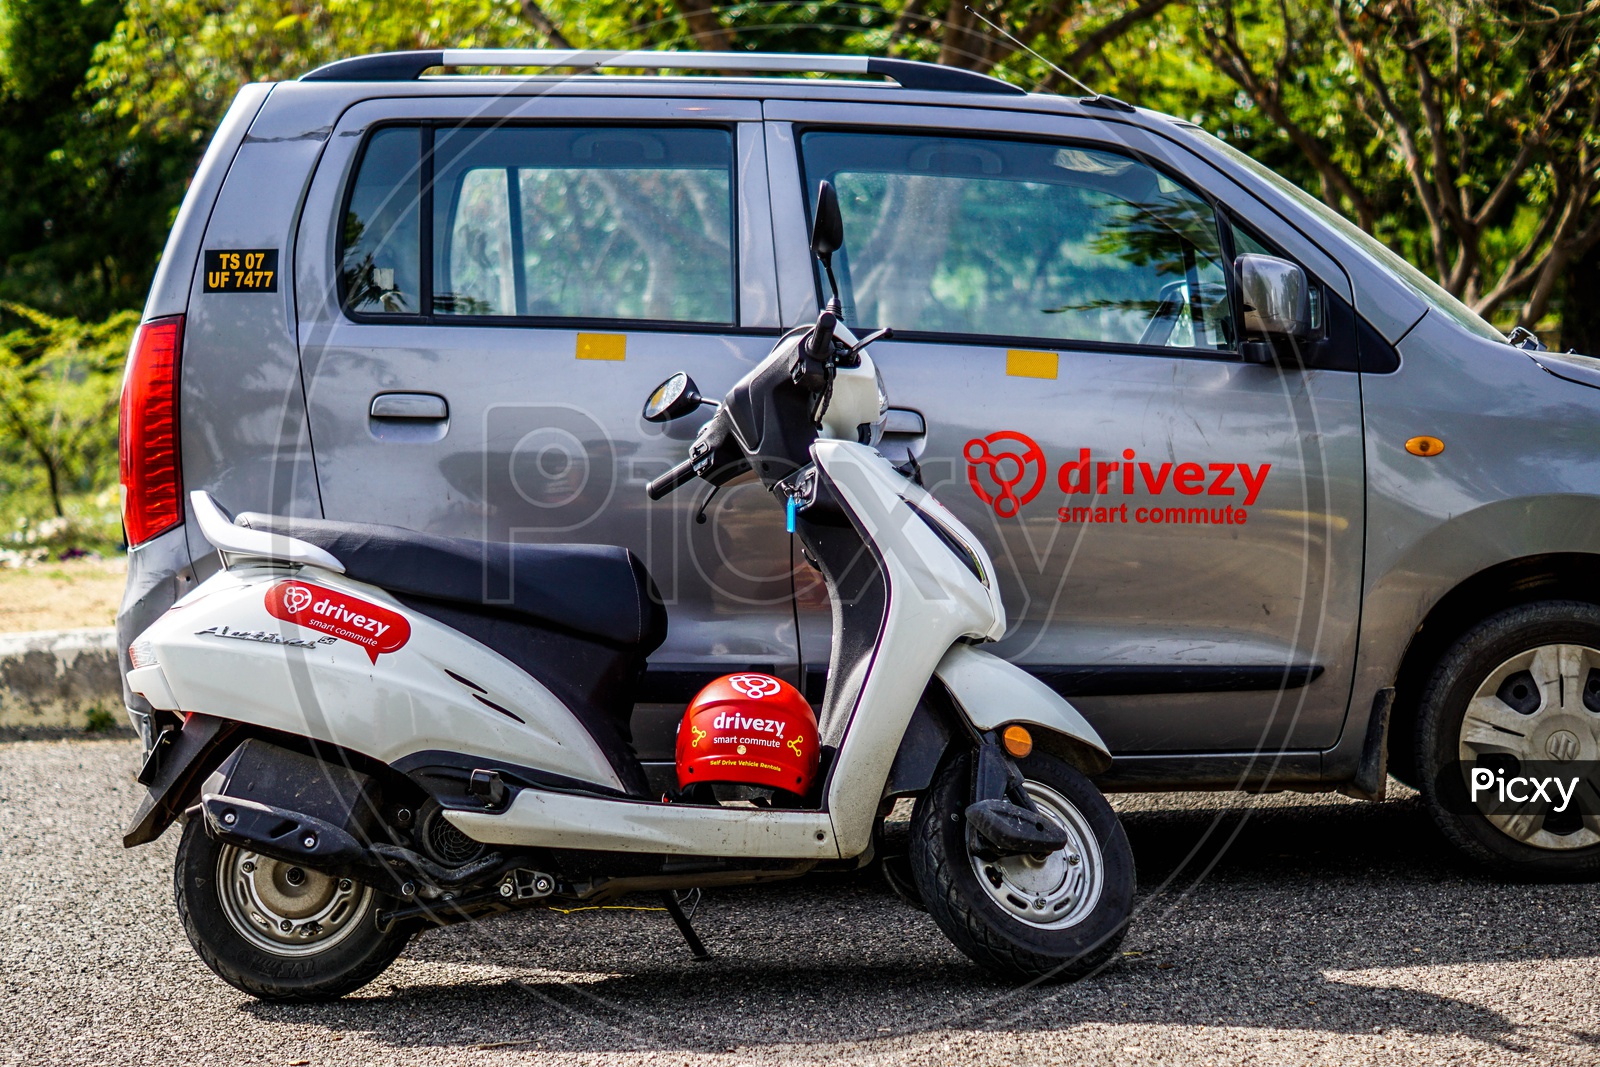 Drivezy Rental bikes and cars